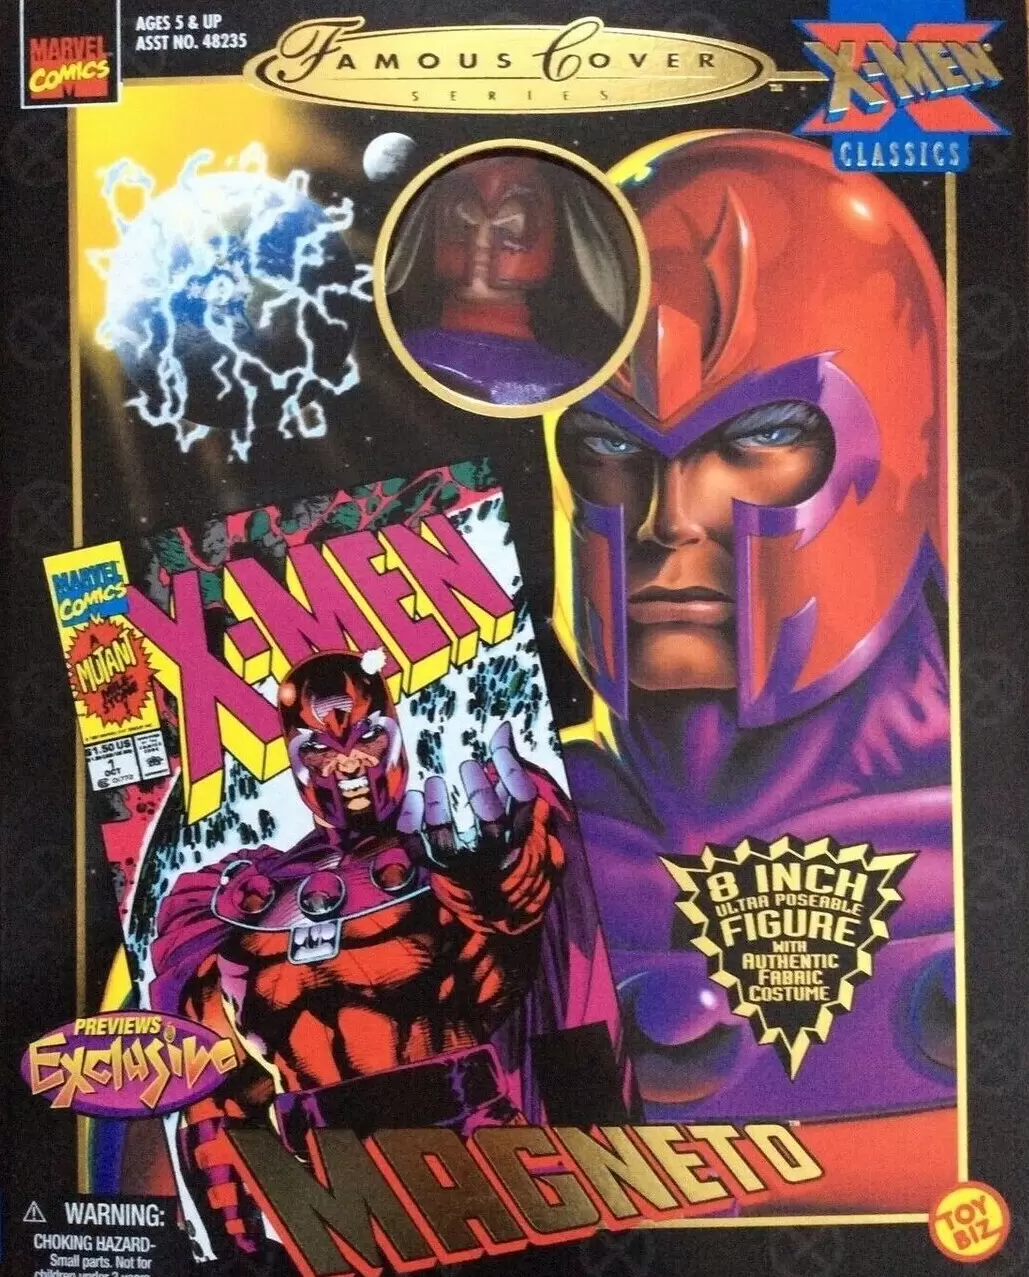 Famous Cover - Magneto